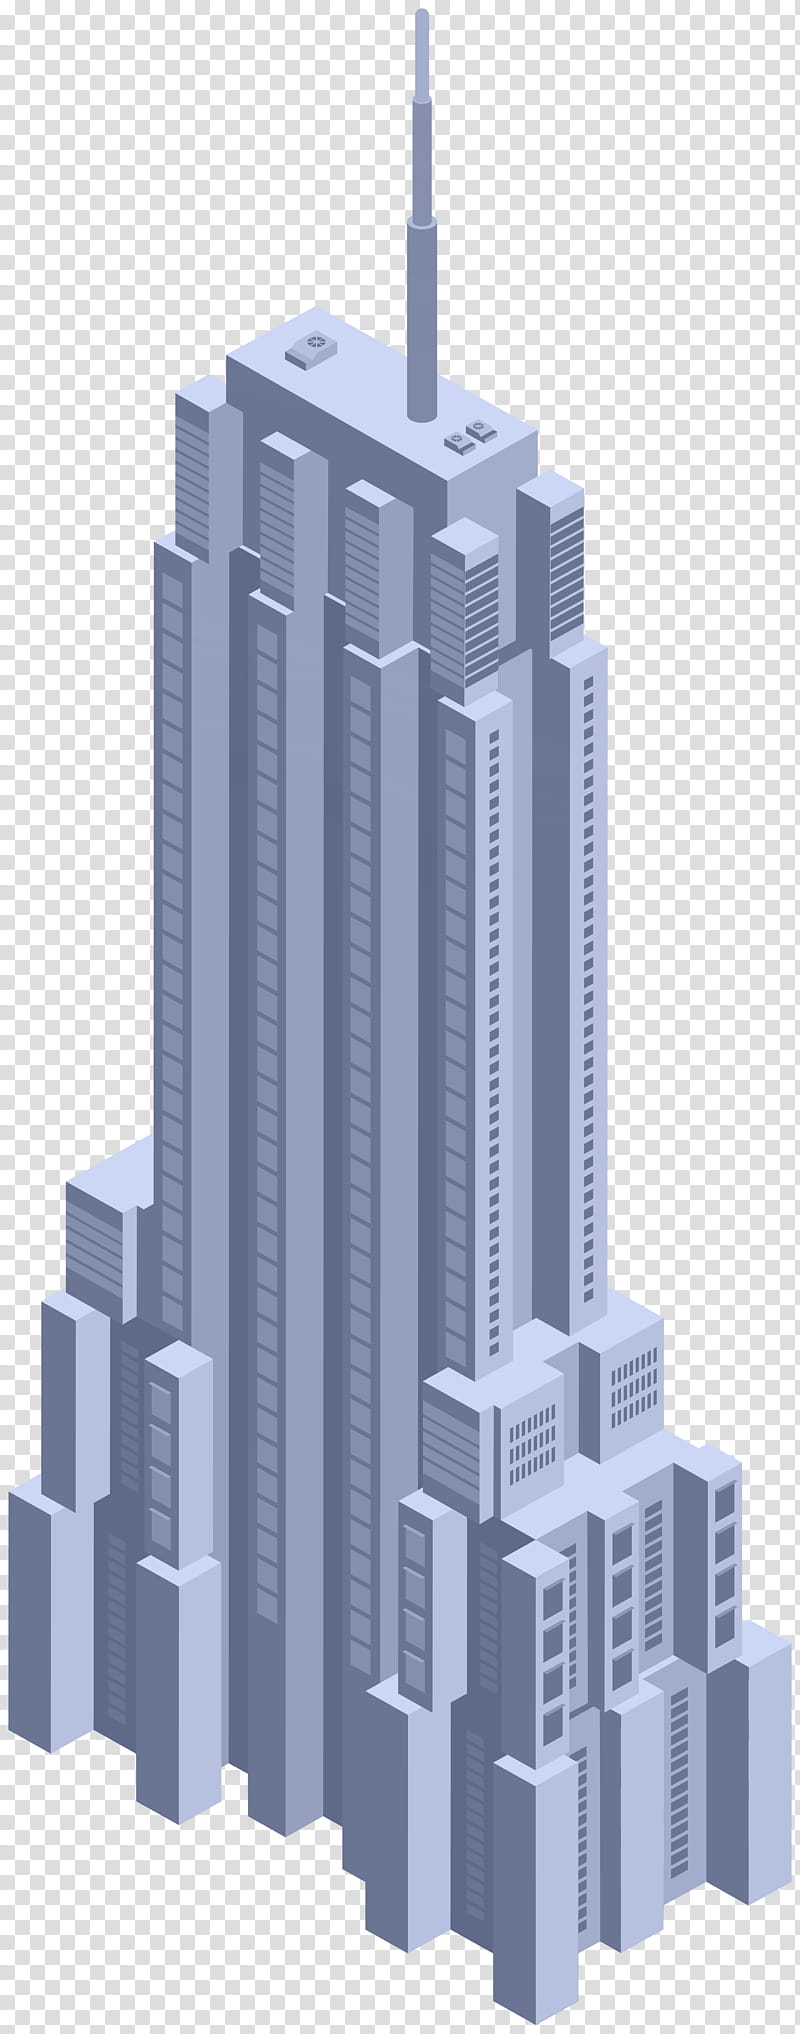 Building, Architecture, Drawing, 2018, Skyscraper, Facade, House, Highrise Building, Metropolis transparent background PNG clipart